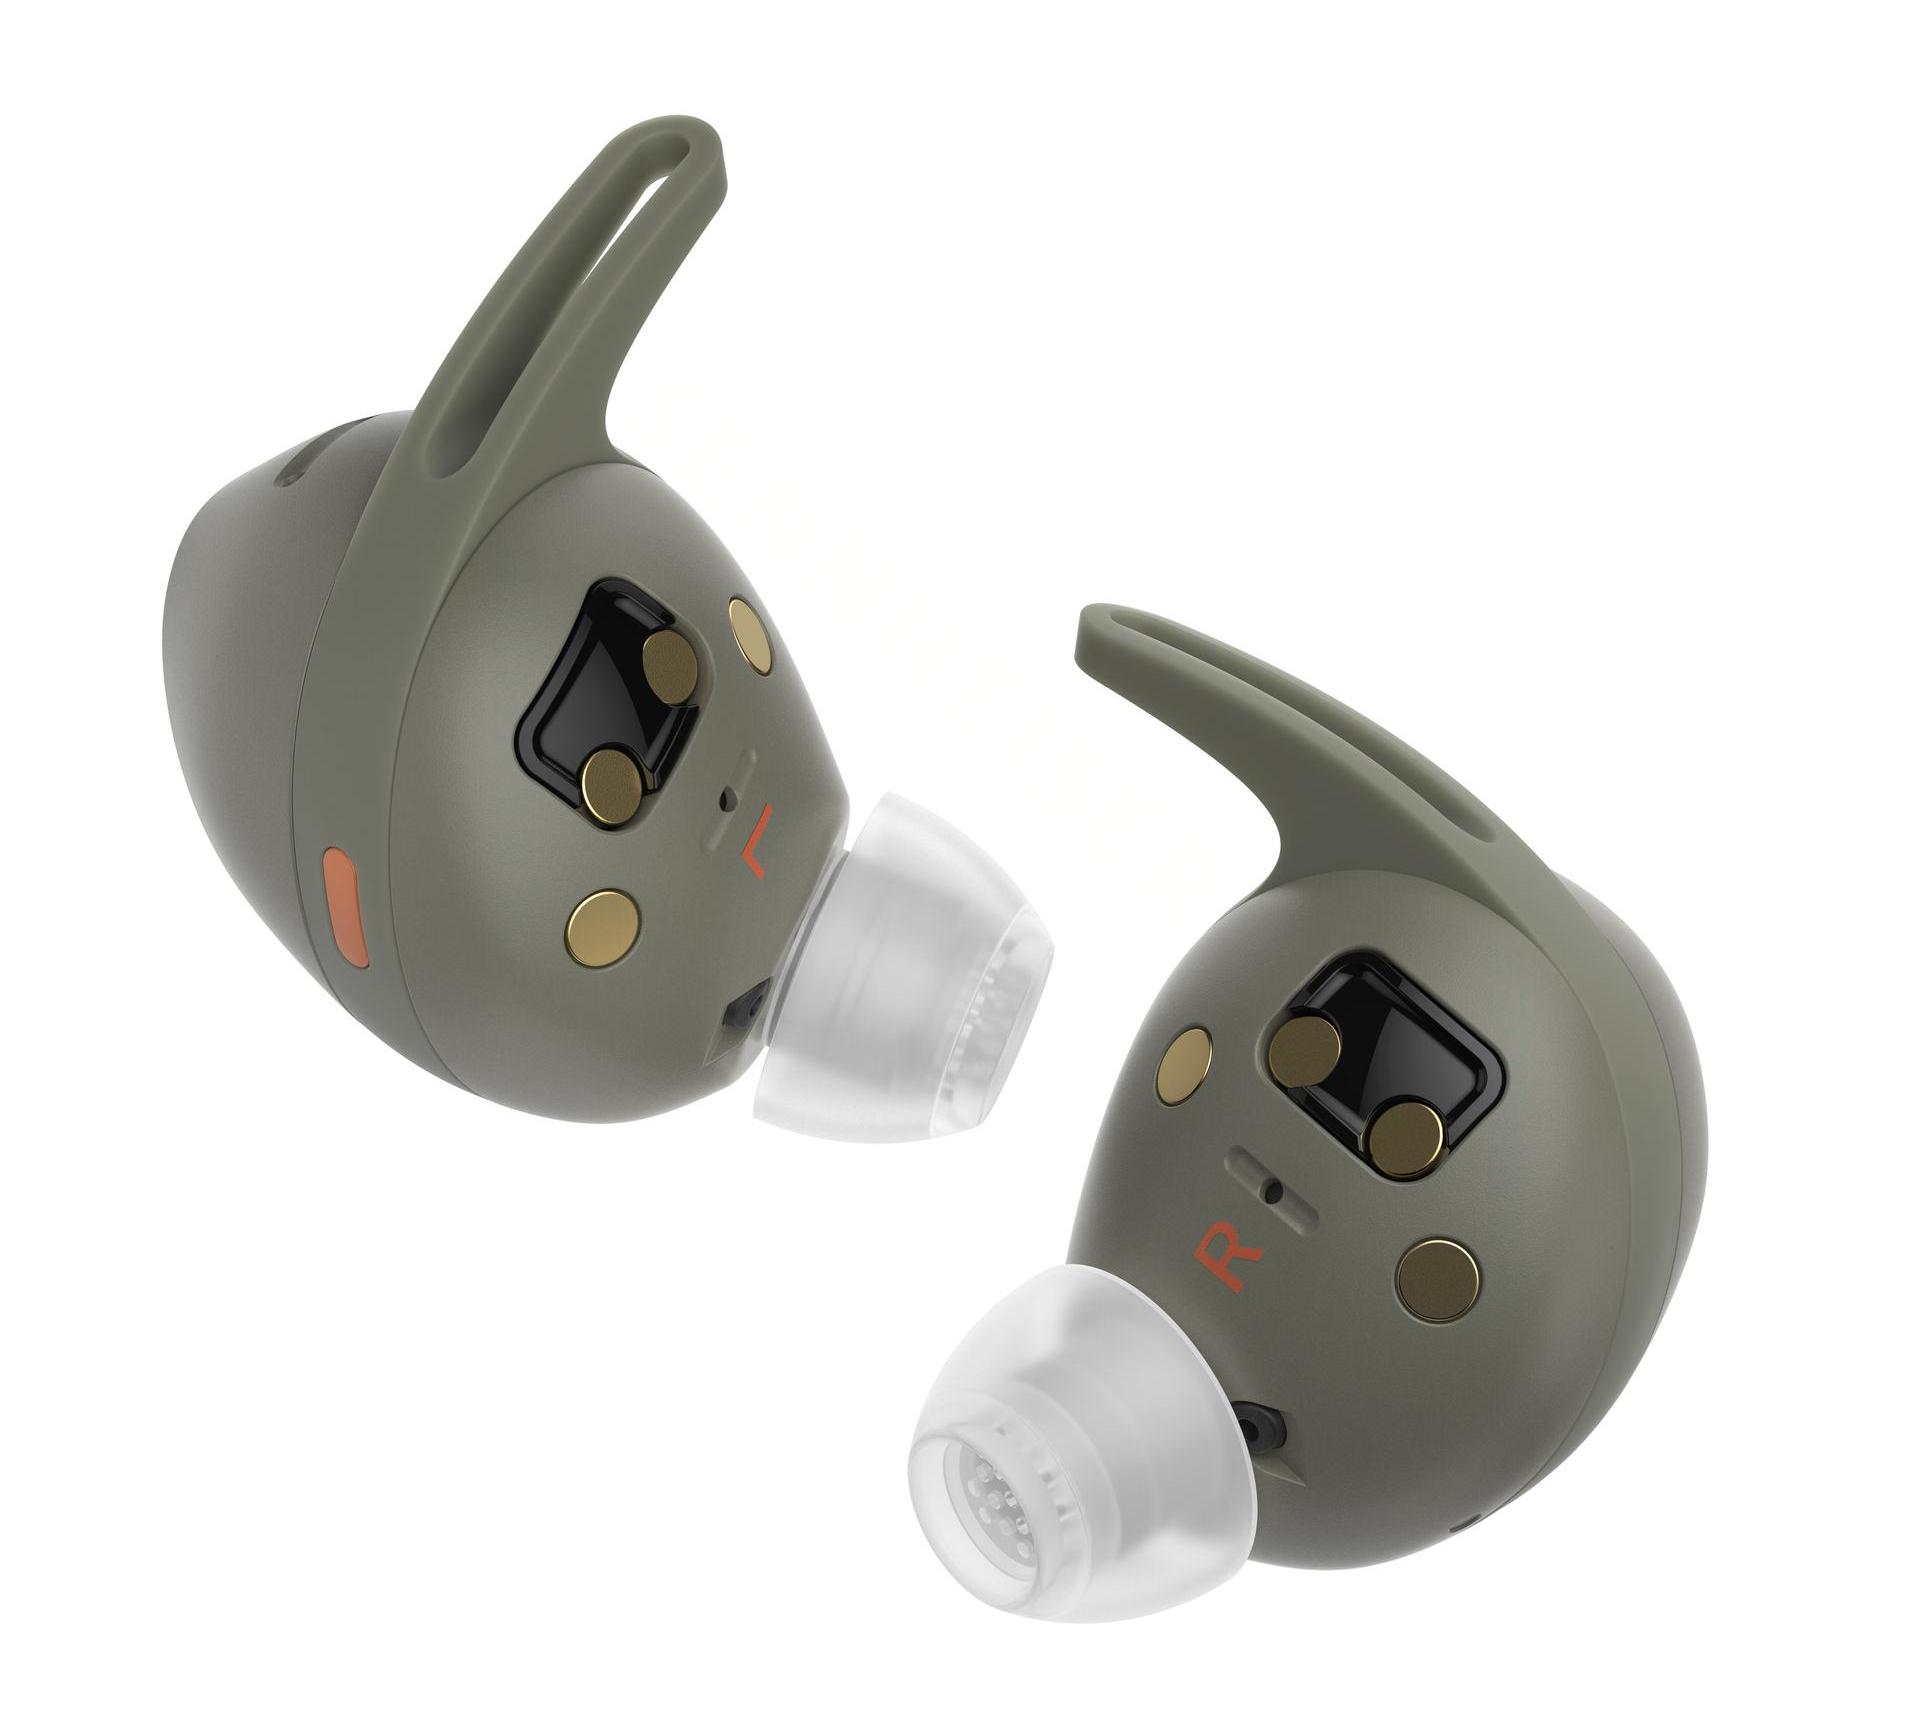 MOMENTUM Sport's integrated heartrate and core temperature sensors monitor your vitals in the ear canal, known for its stability during physical movement